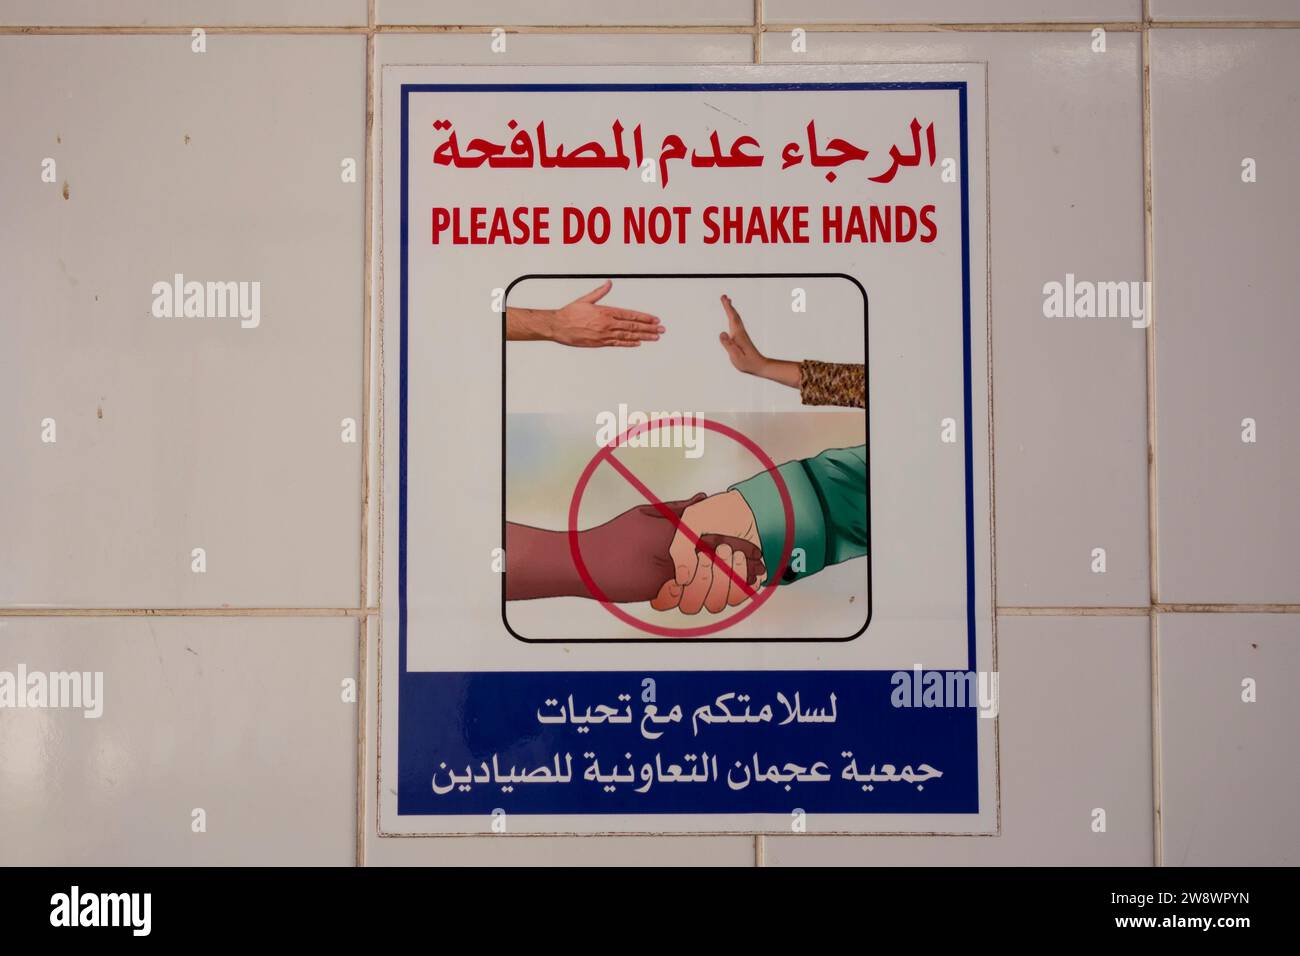 Wall sign in fish market, in Arabic and English ,(Avoid hand shake to prevent infection spread), Ajman, United Arab Emirates. Stock Photo